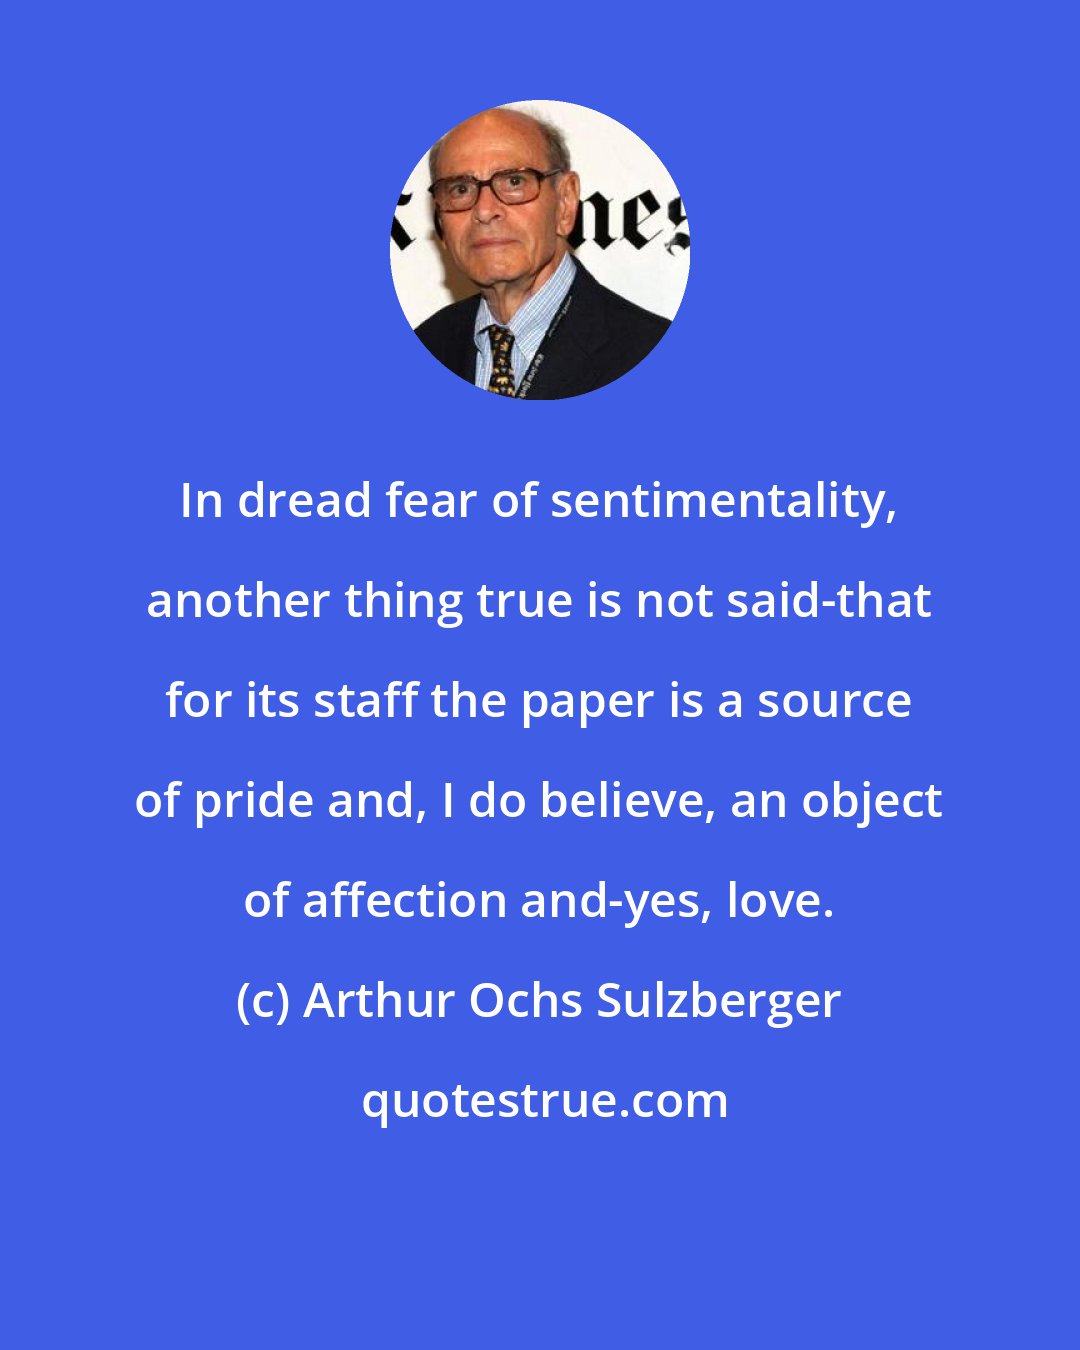 Arthur Ochs Sulzberger: In dread fear of sentimentality, another thing true is not said-that for its staff the paper is a source of pride and, I do believe, an object of affection and-yes, love.